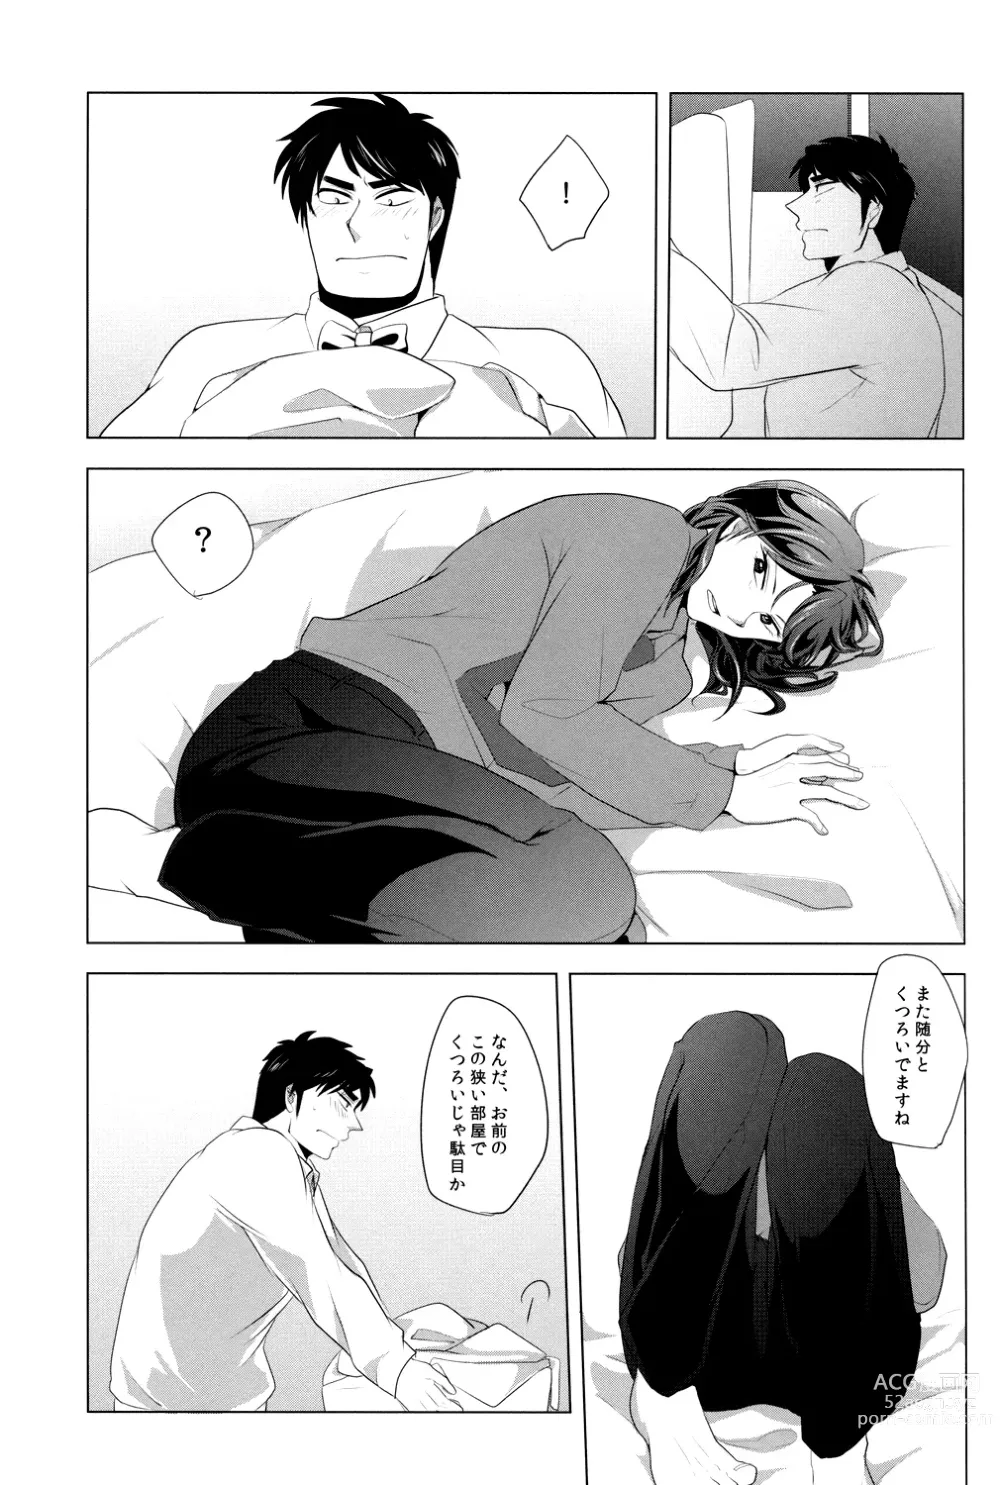 Page 5 of doujinshi Red Dog